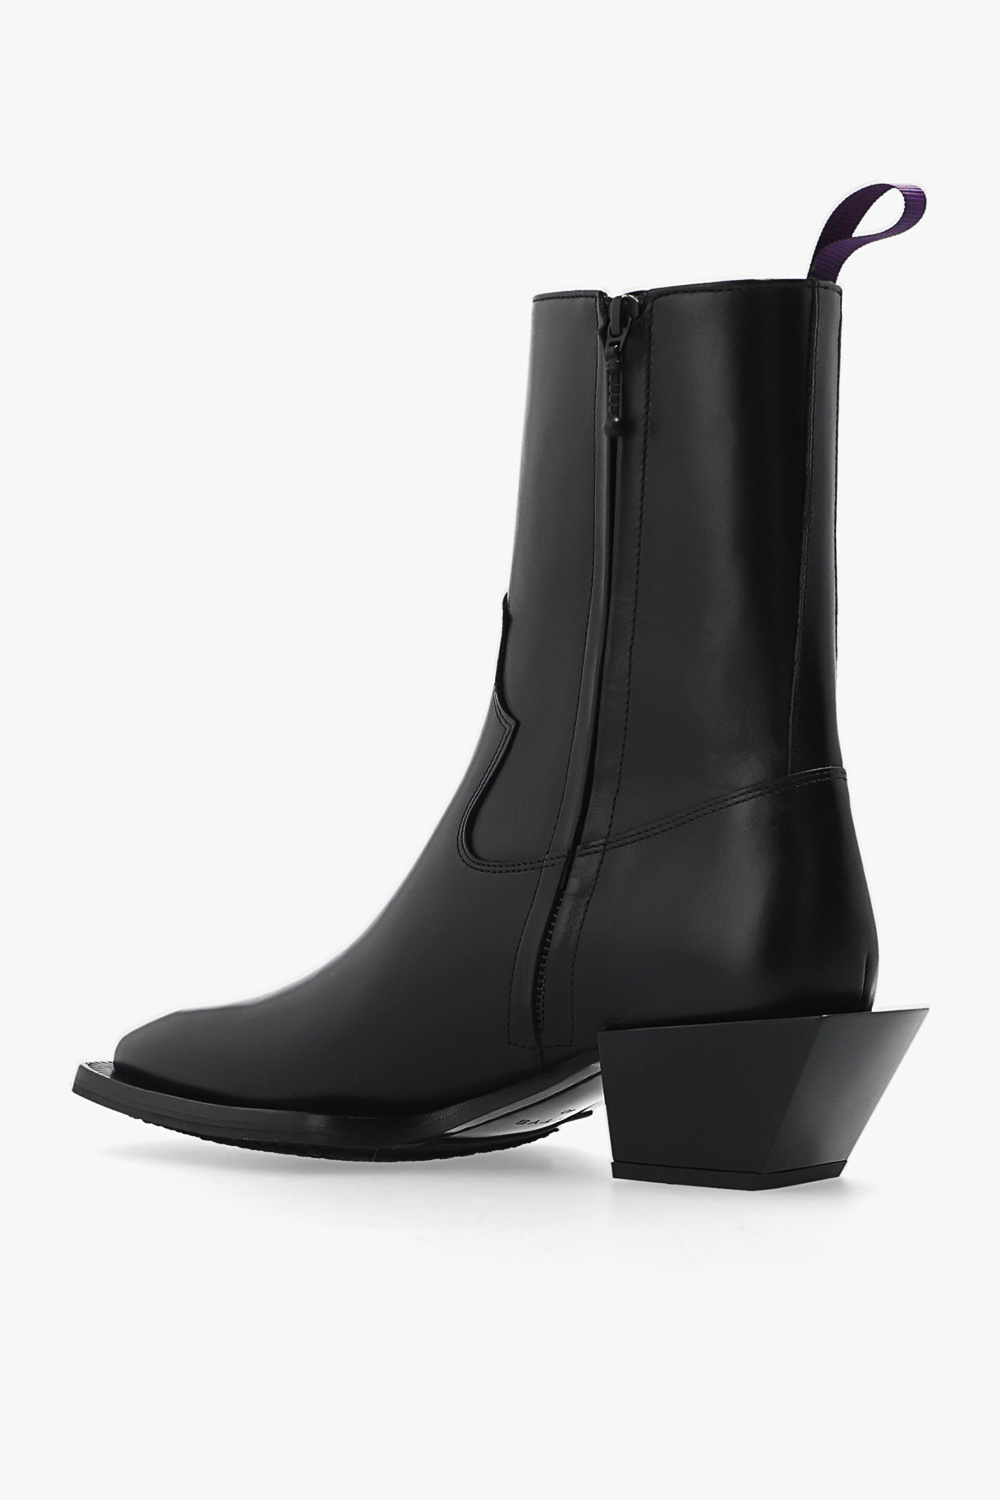 ‘Luciano’ heeled ankle boots Eytys - Vitkac Sweden